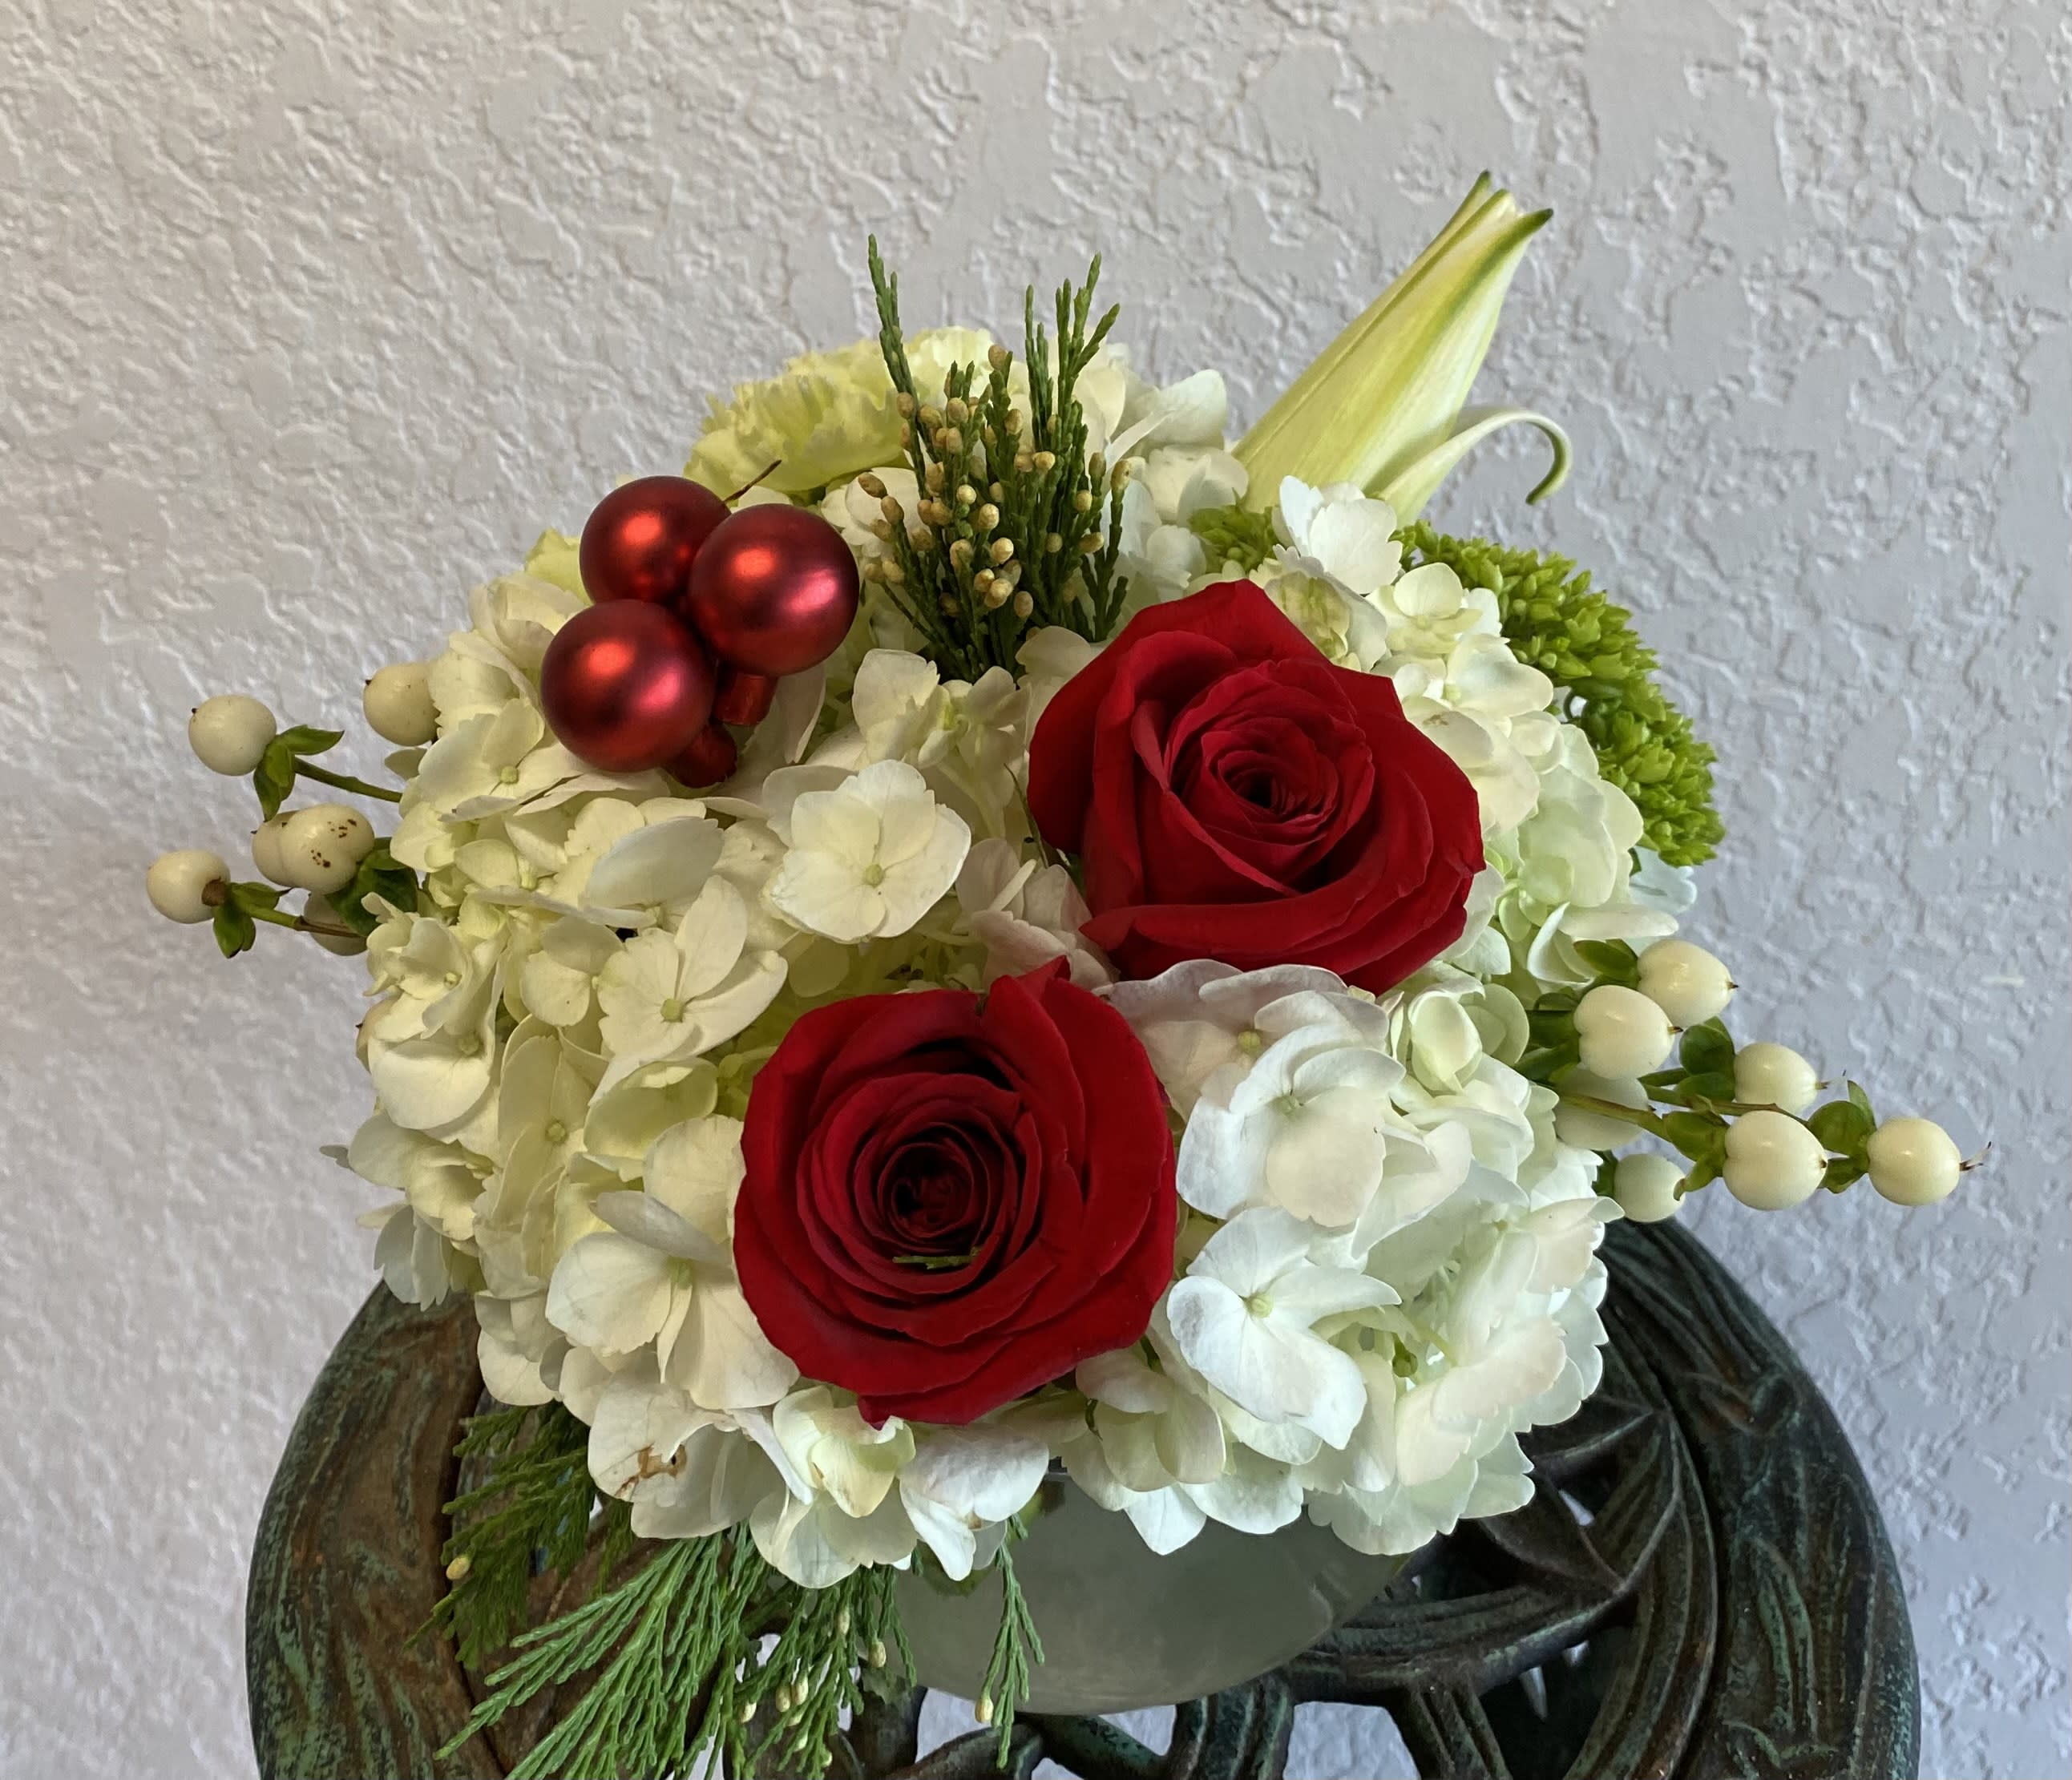 CFH112 - A compact arrangment for the table with flowers such as hydrangeas, roses and holiday accents. 